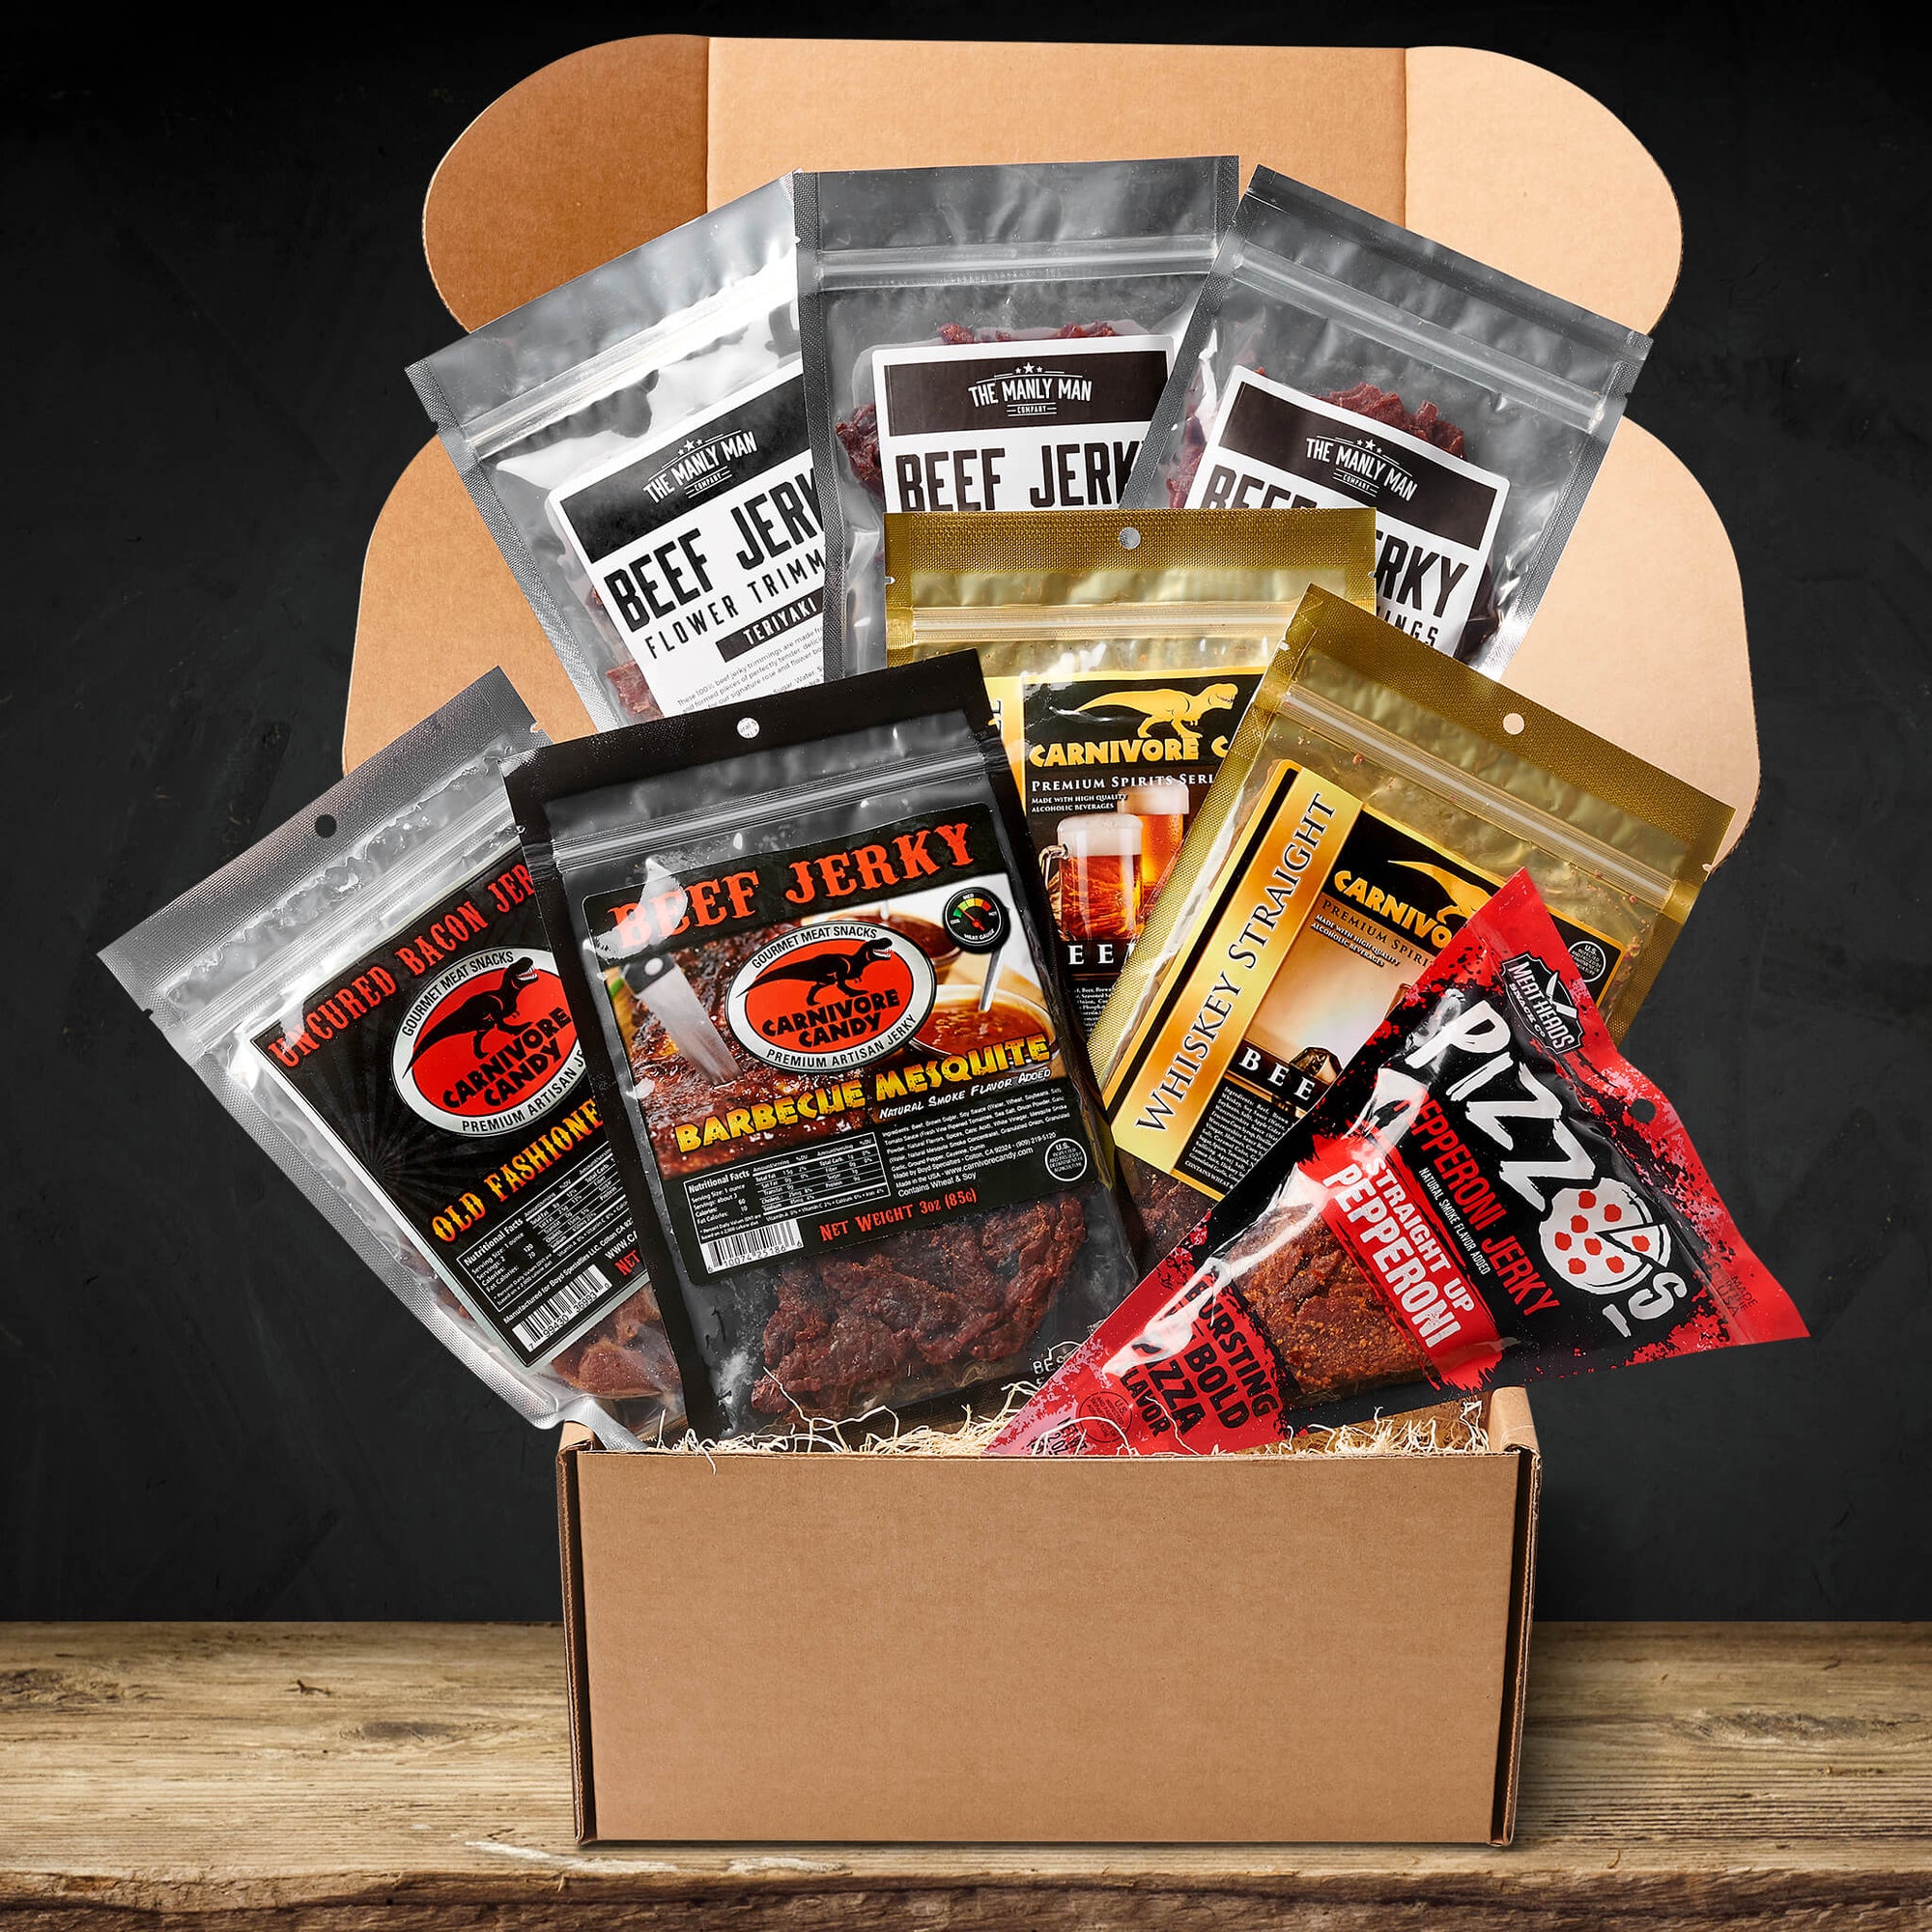 The best jerky gift crate sitting on wood paneled floor